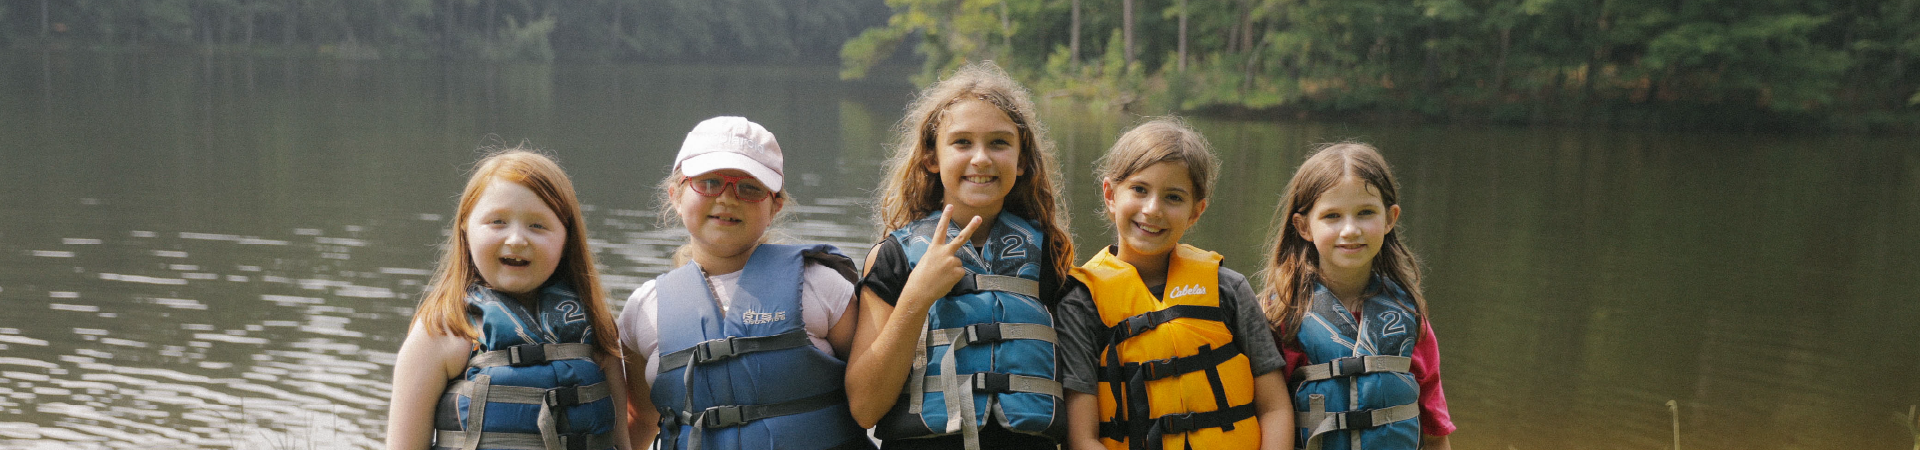  young Girl Scouts in life jackets pose for photo near a lake 